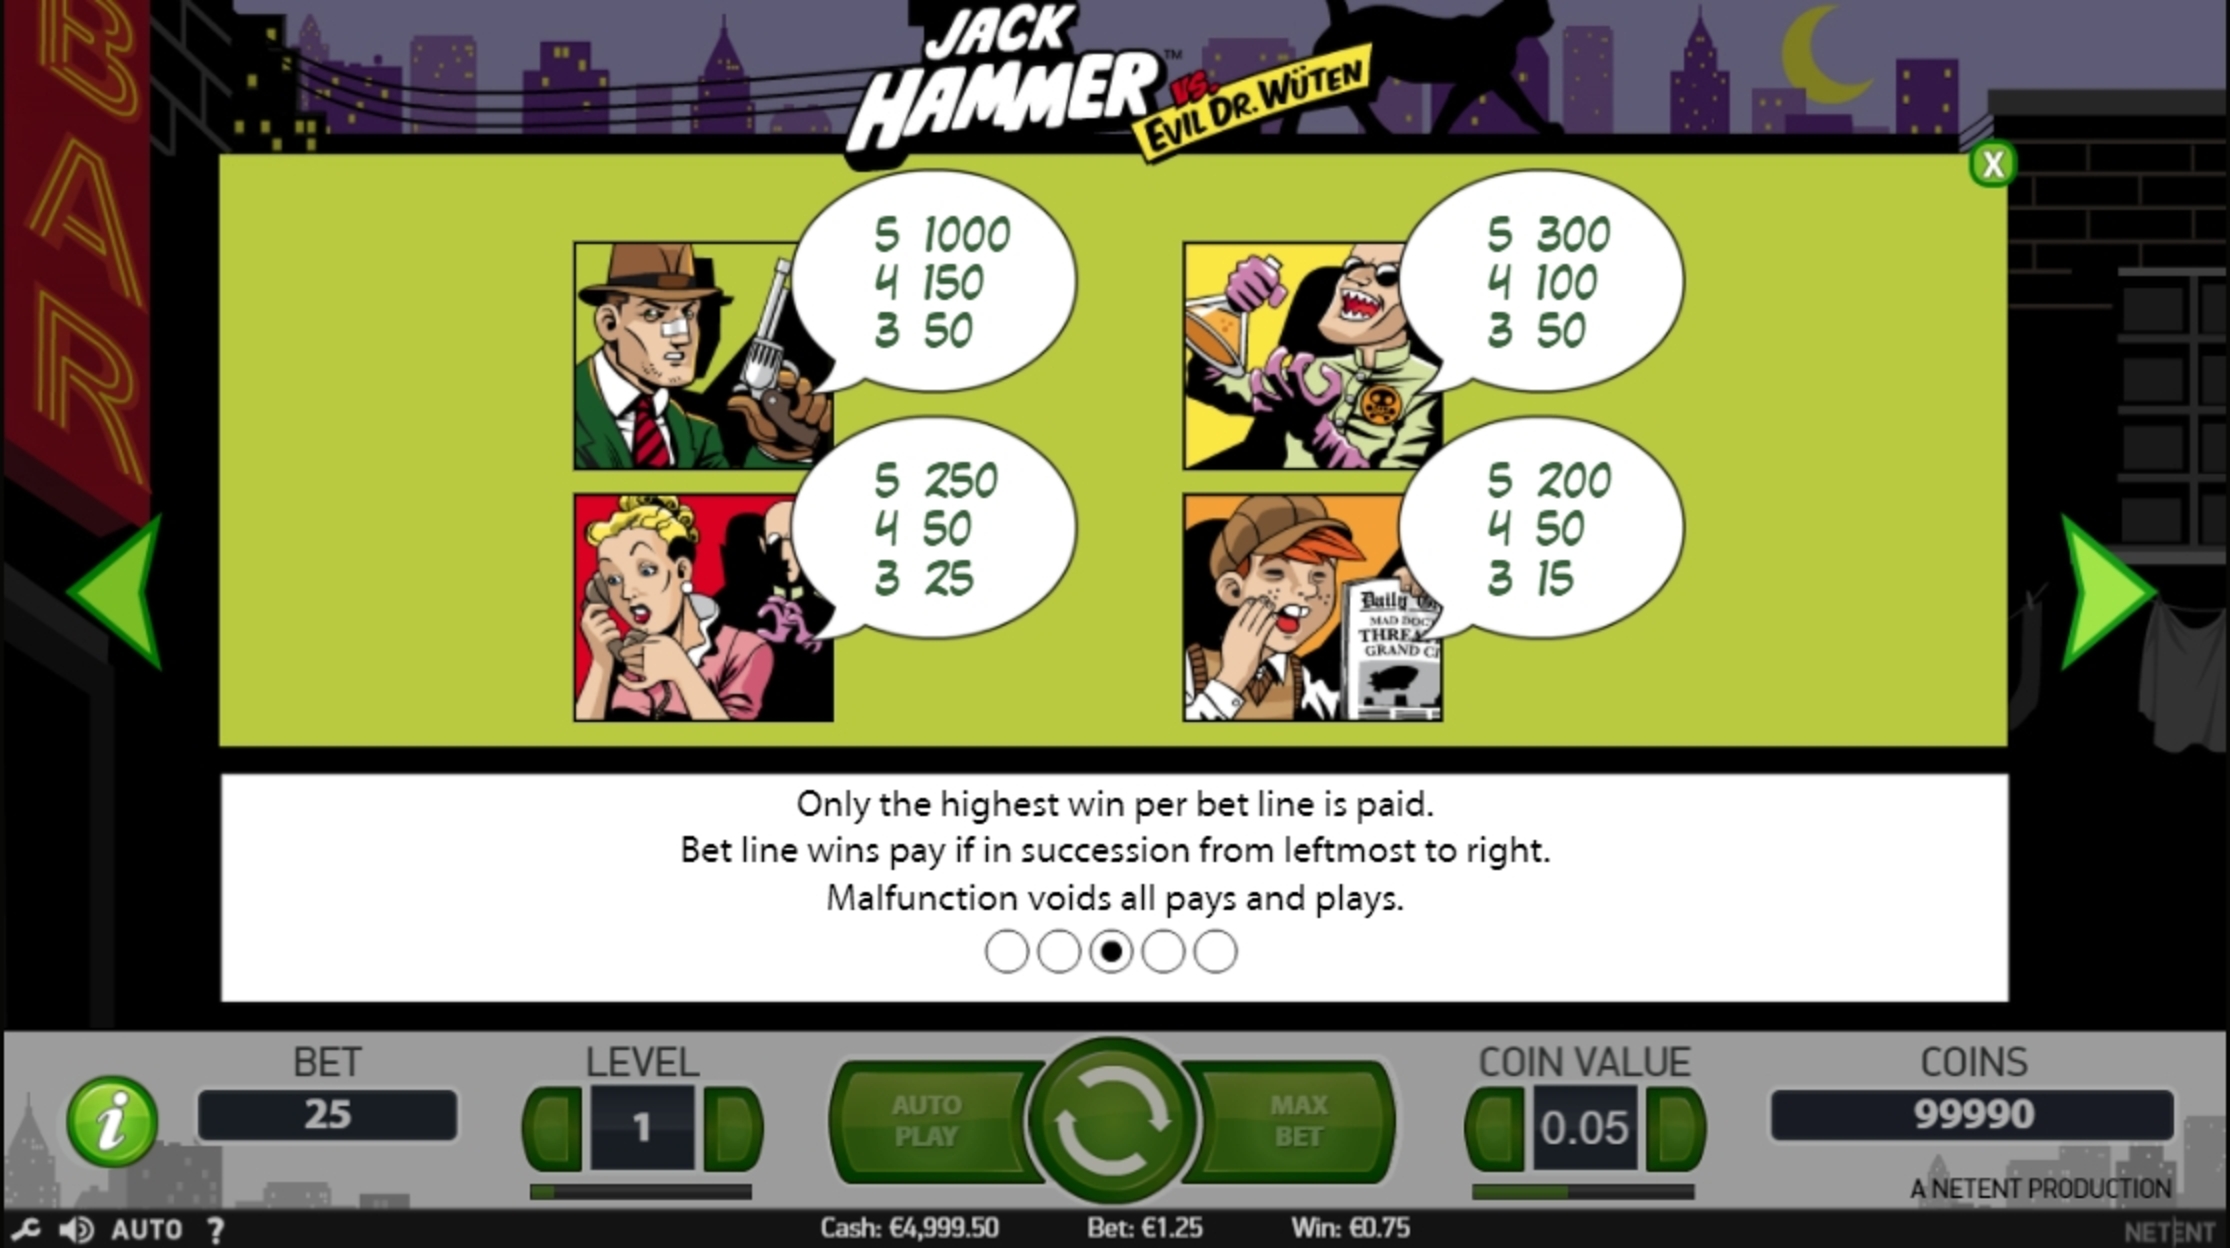 Info of Jack Hammer Slot Game by NetEnt